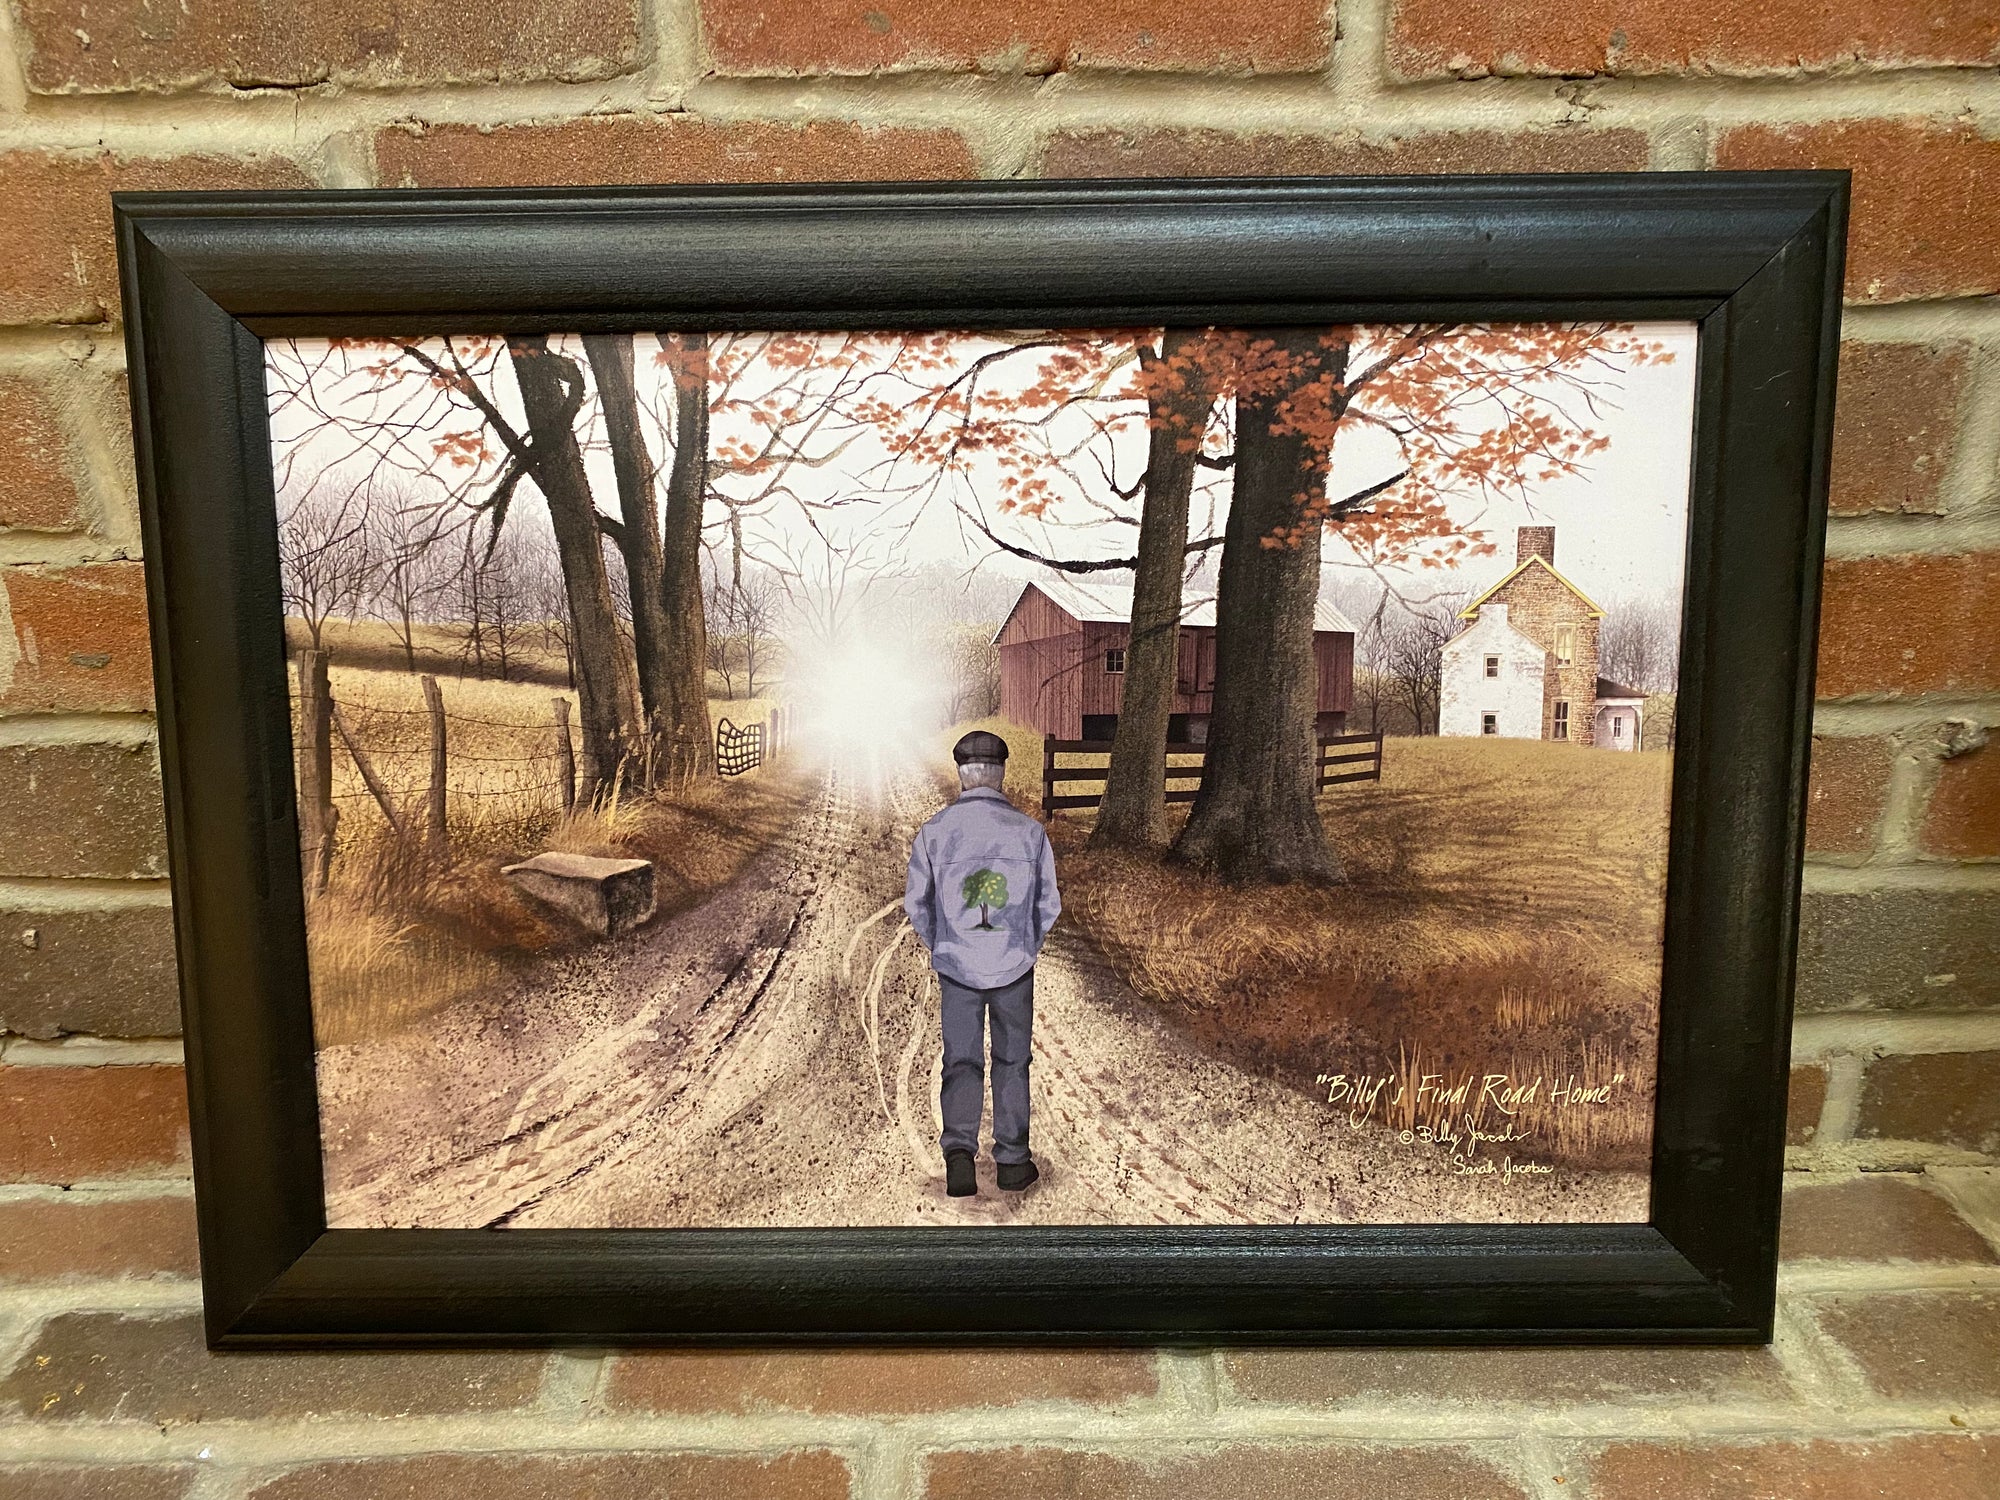 Billy’s Final Road Home Framed Print - 2 Sizes